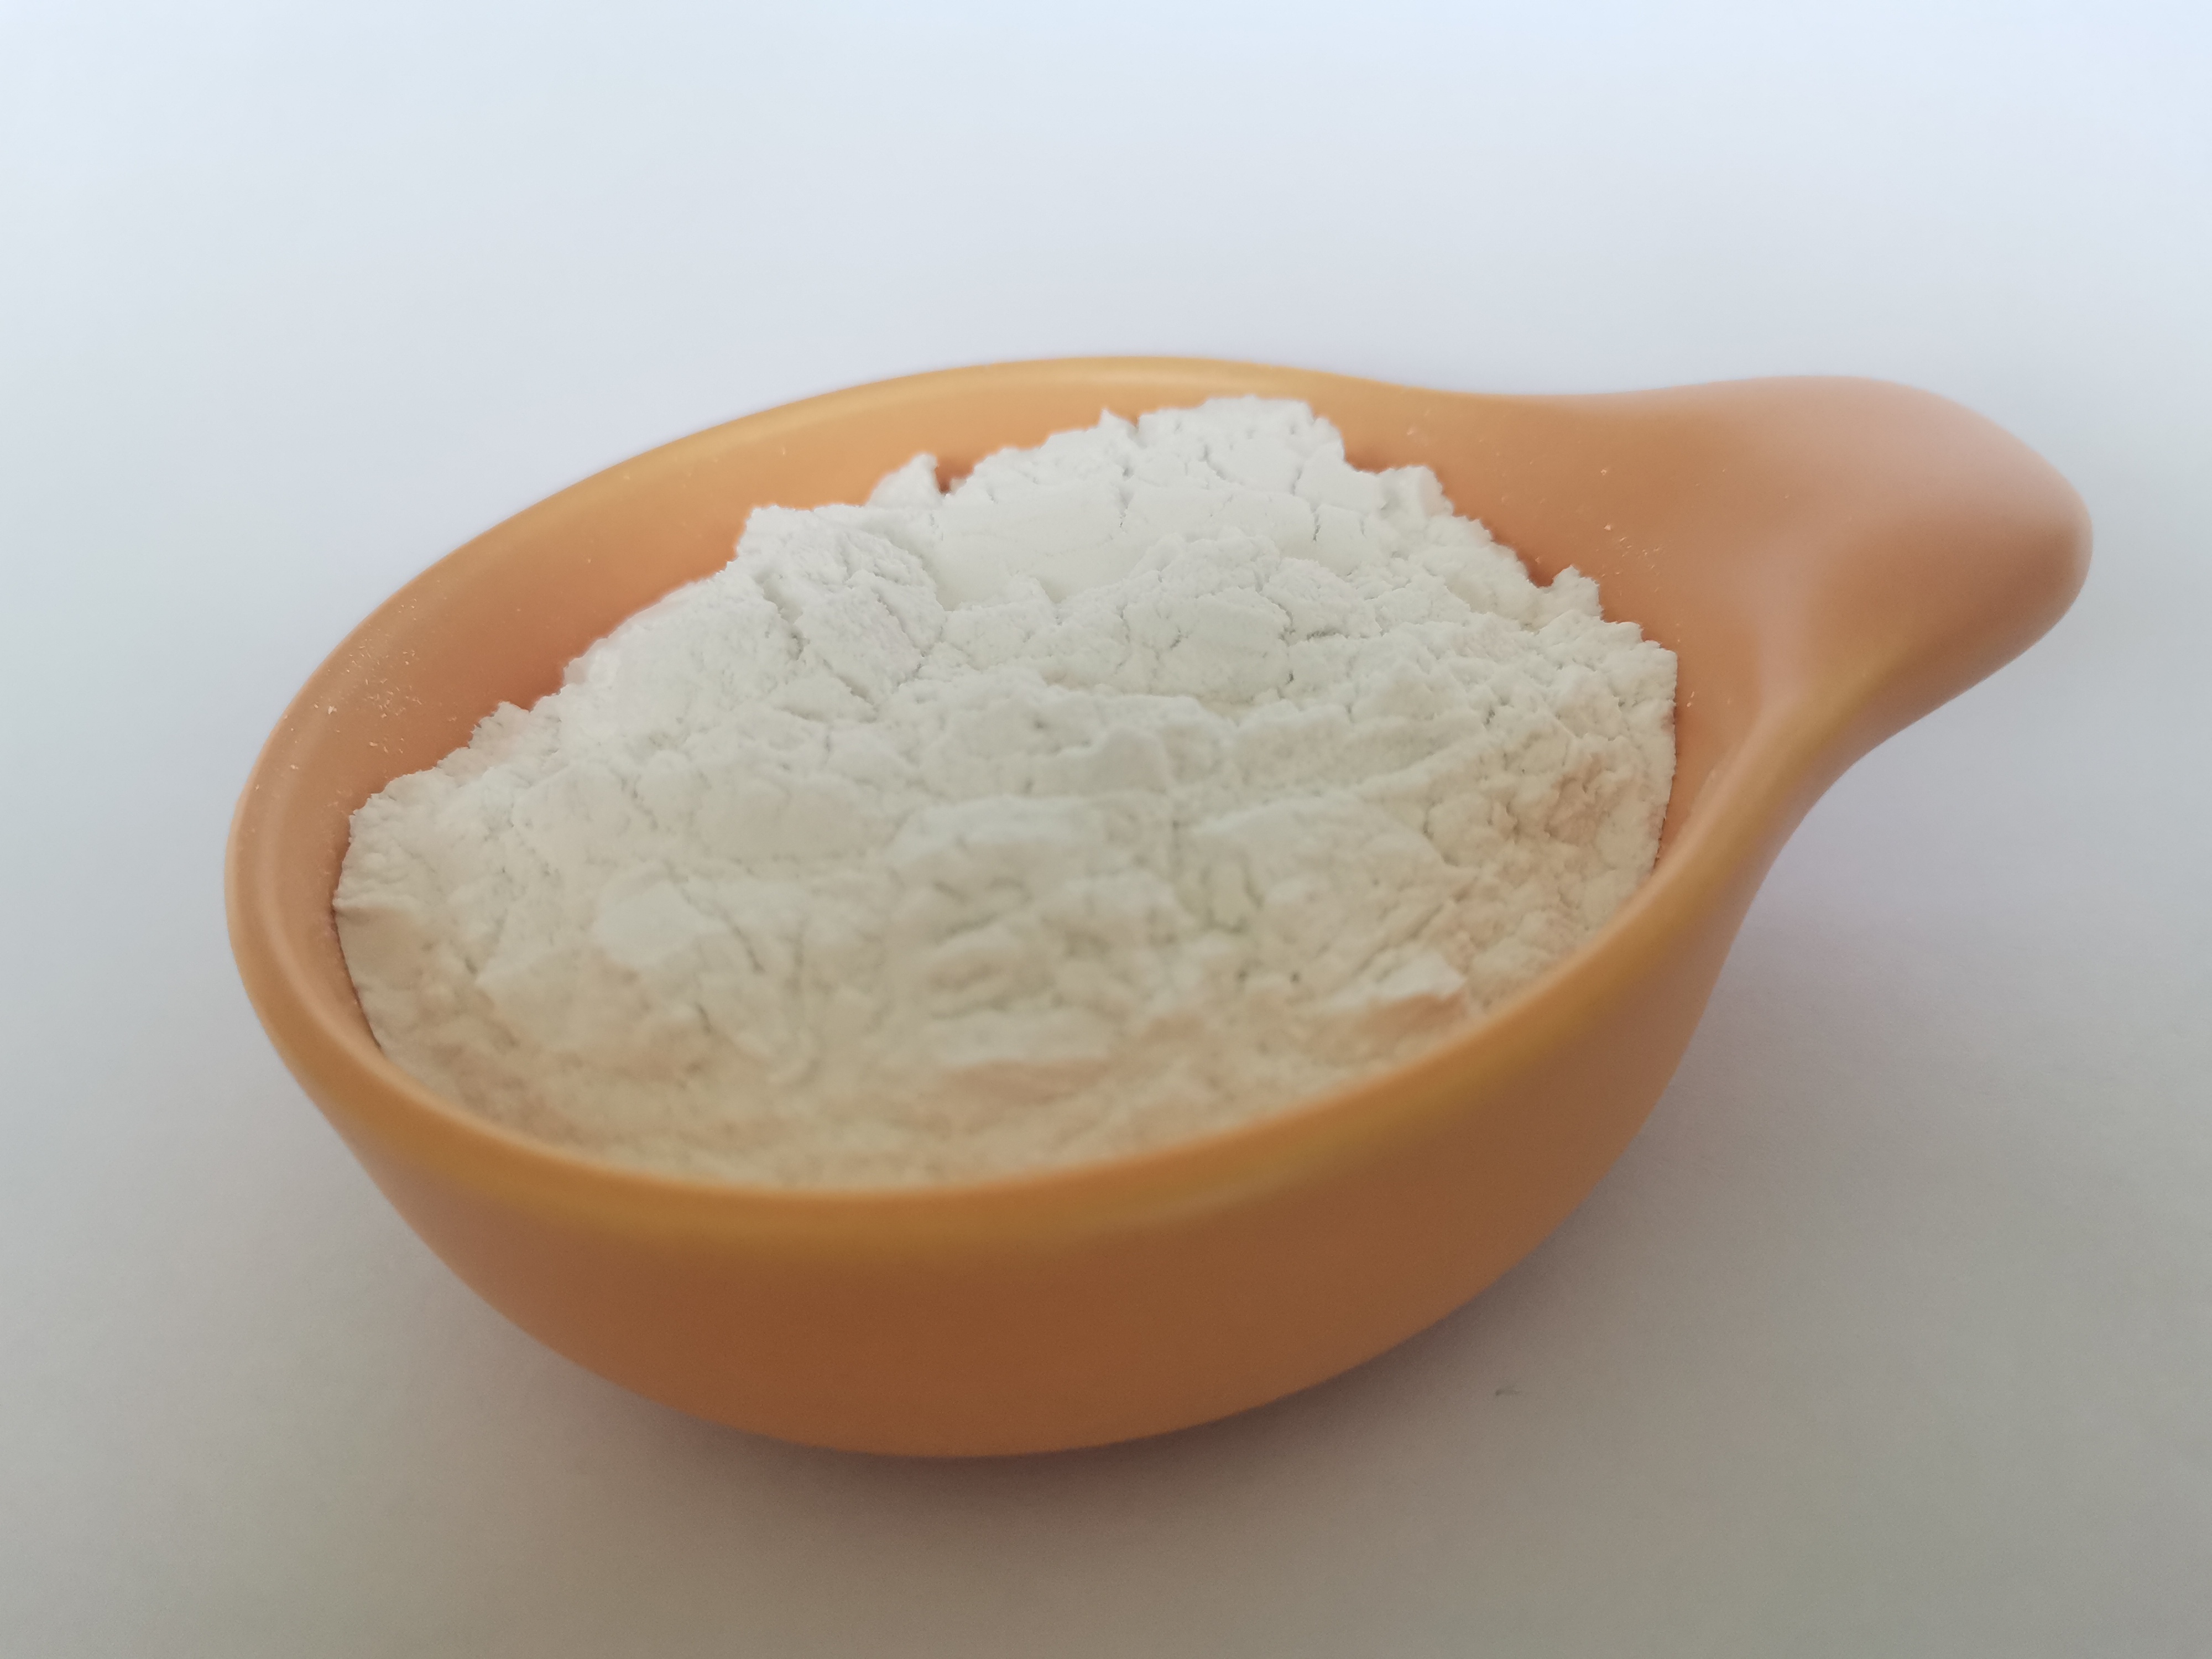 What Are the Benefits of Diatomaceous Earth?